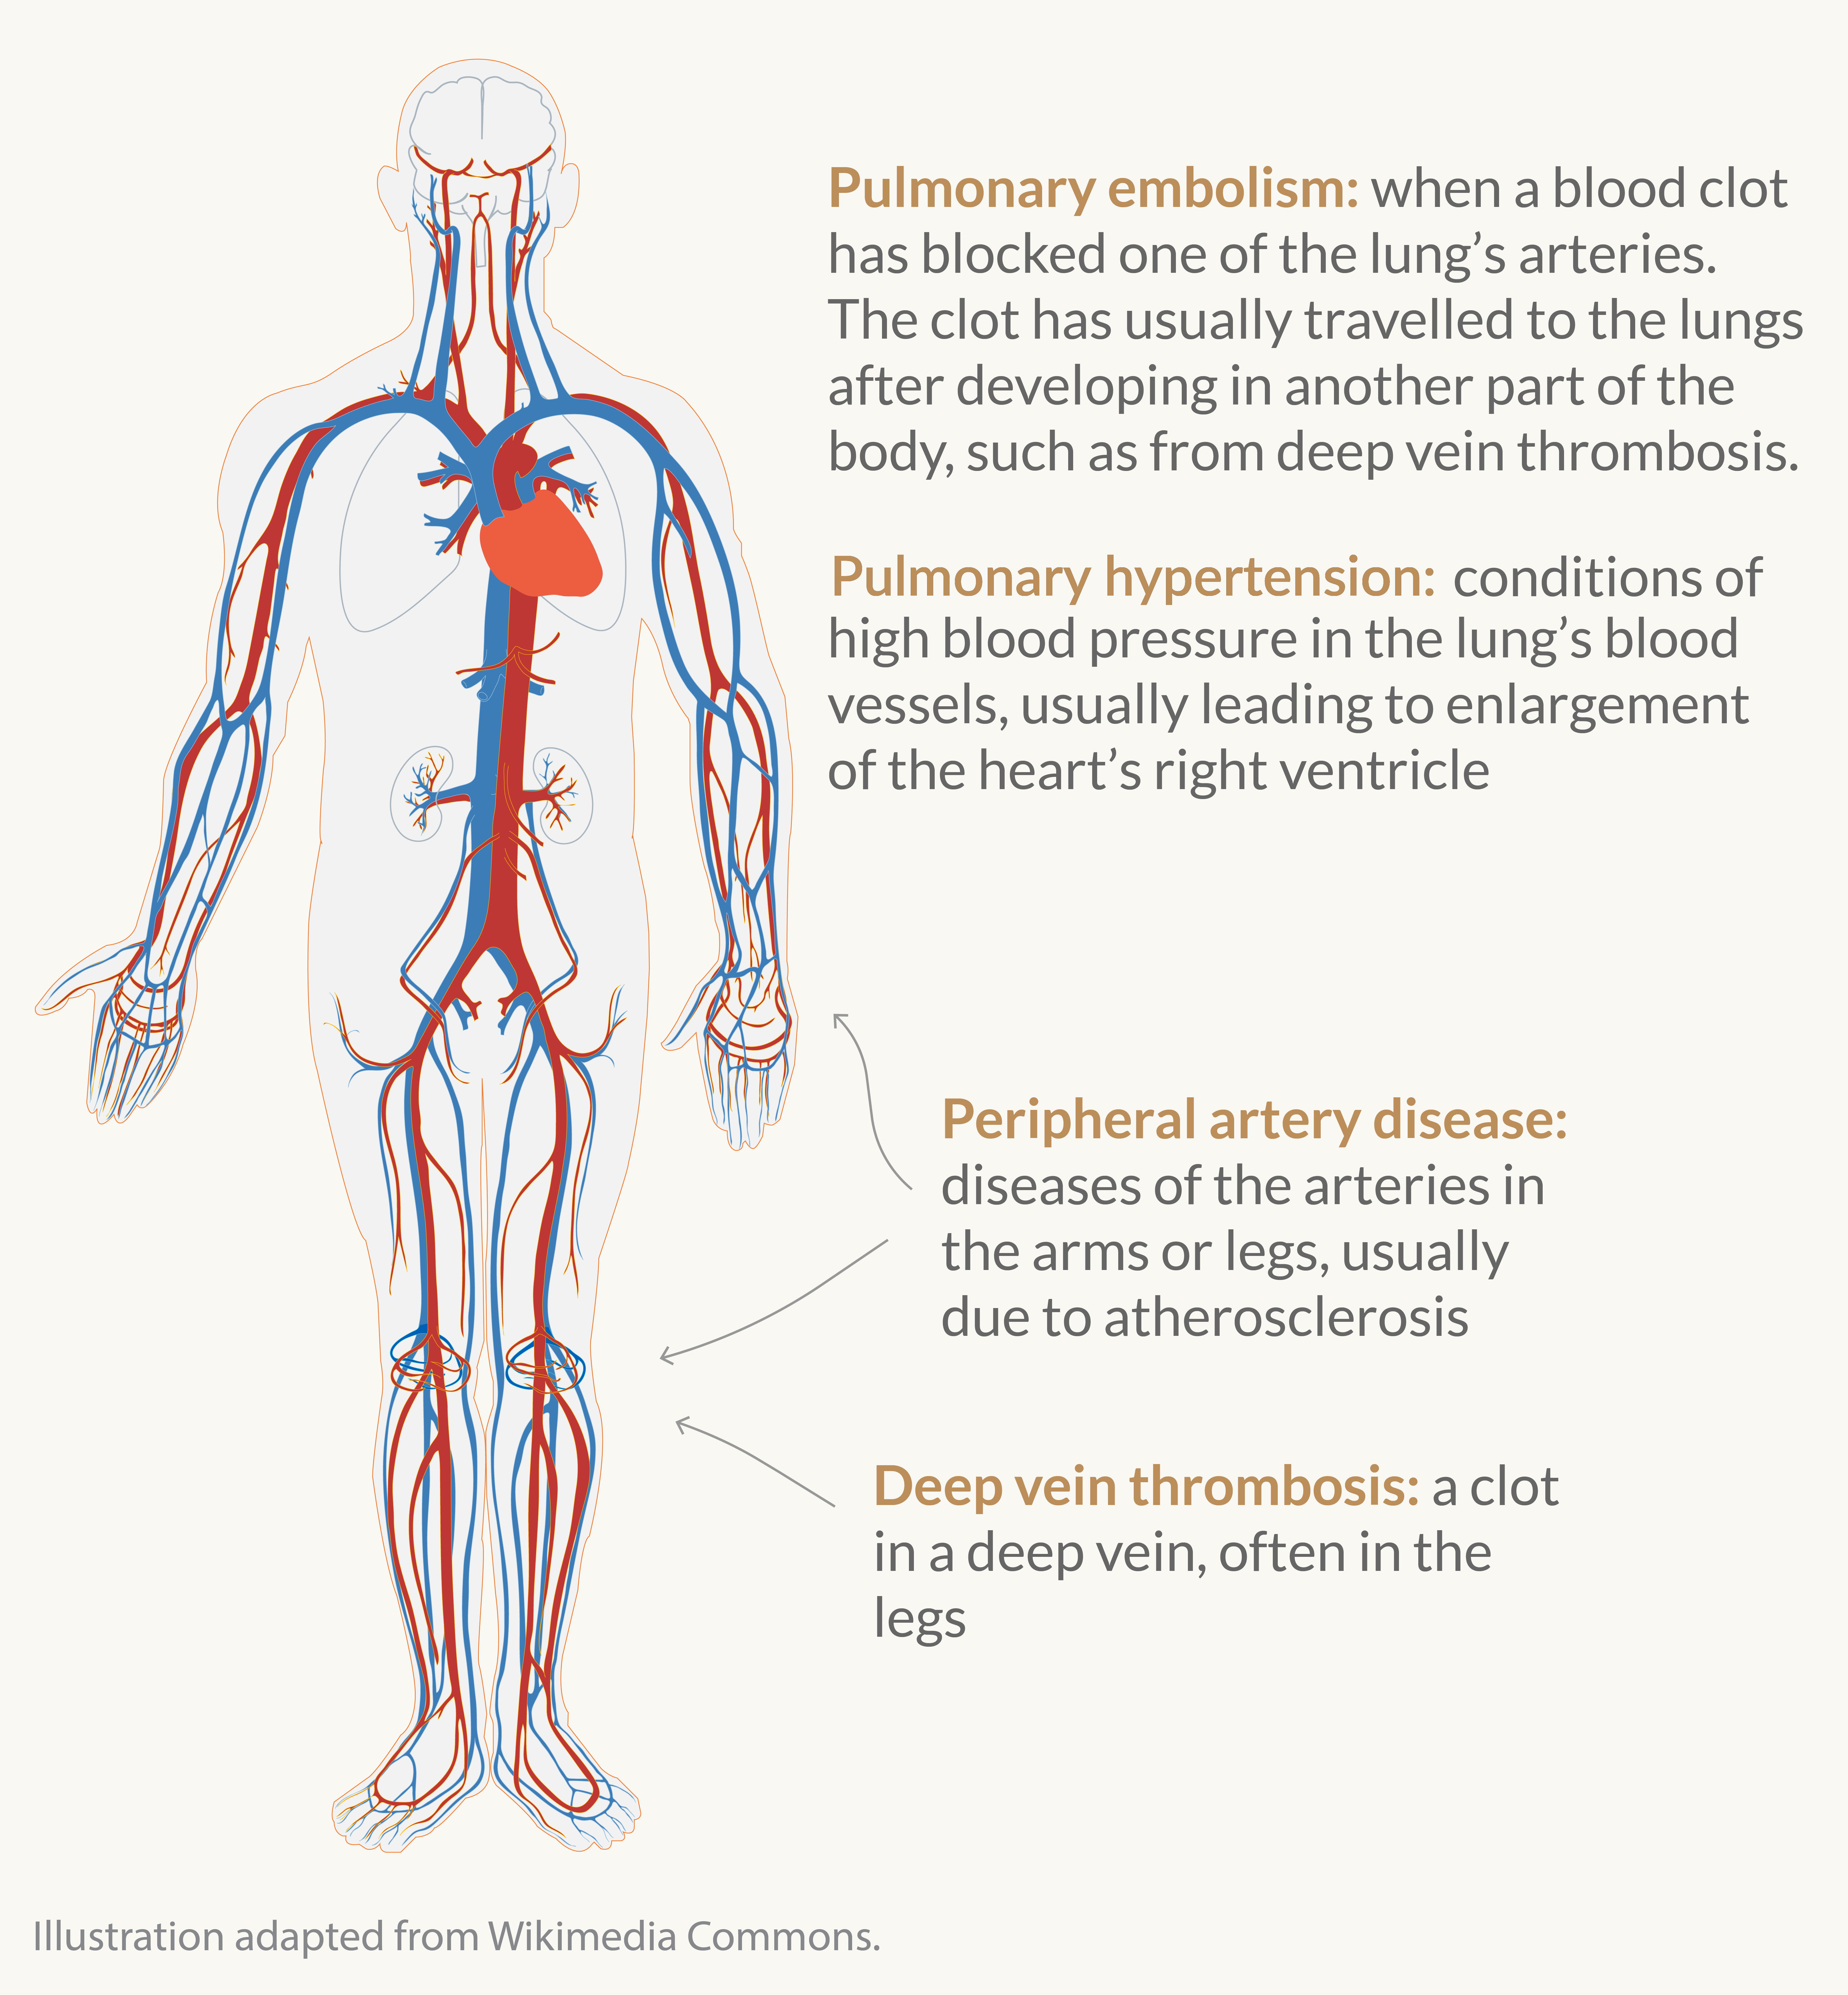 Illustration of cardiovascular diseases of the lungs and peripheral vessels